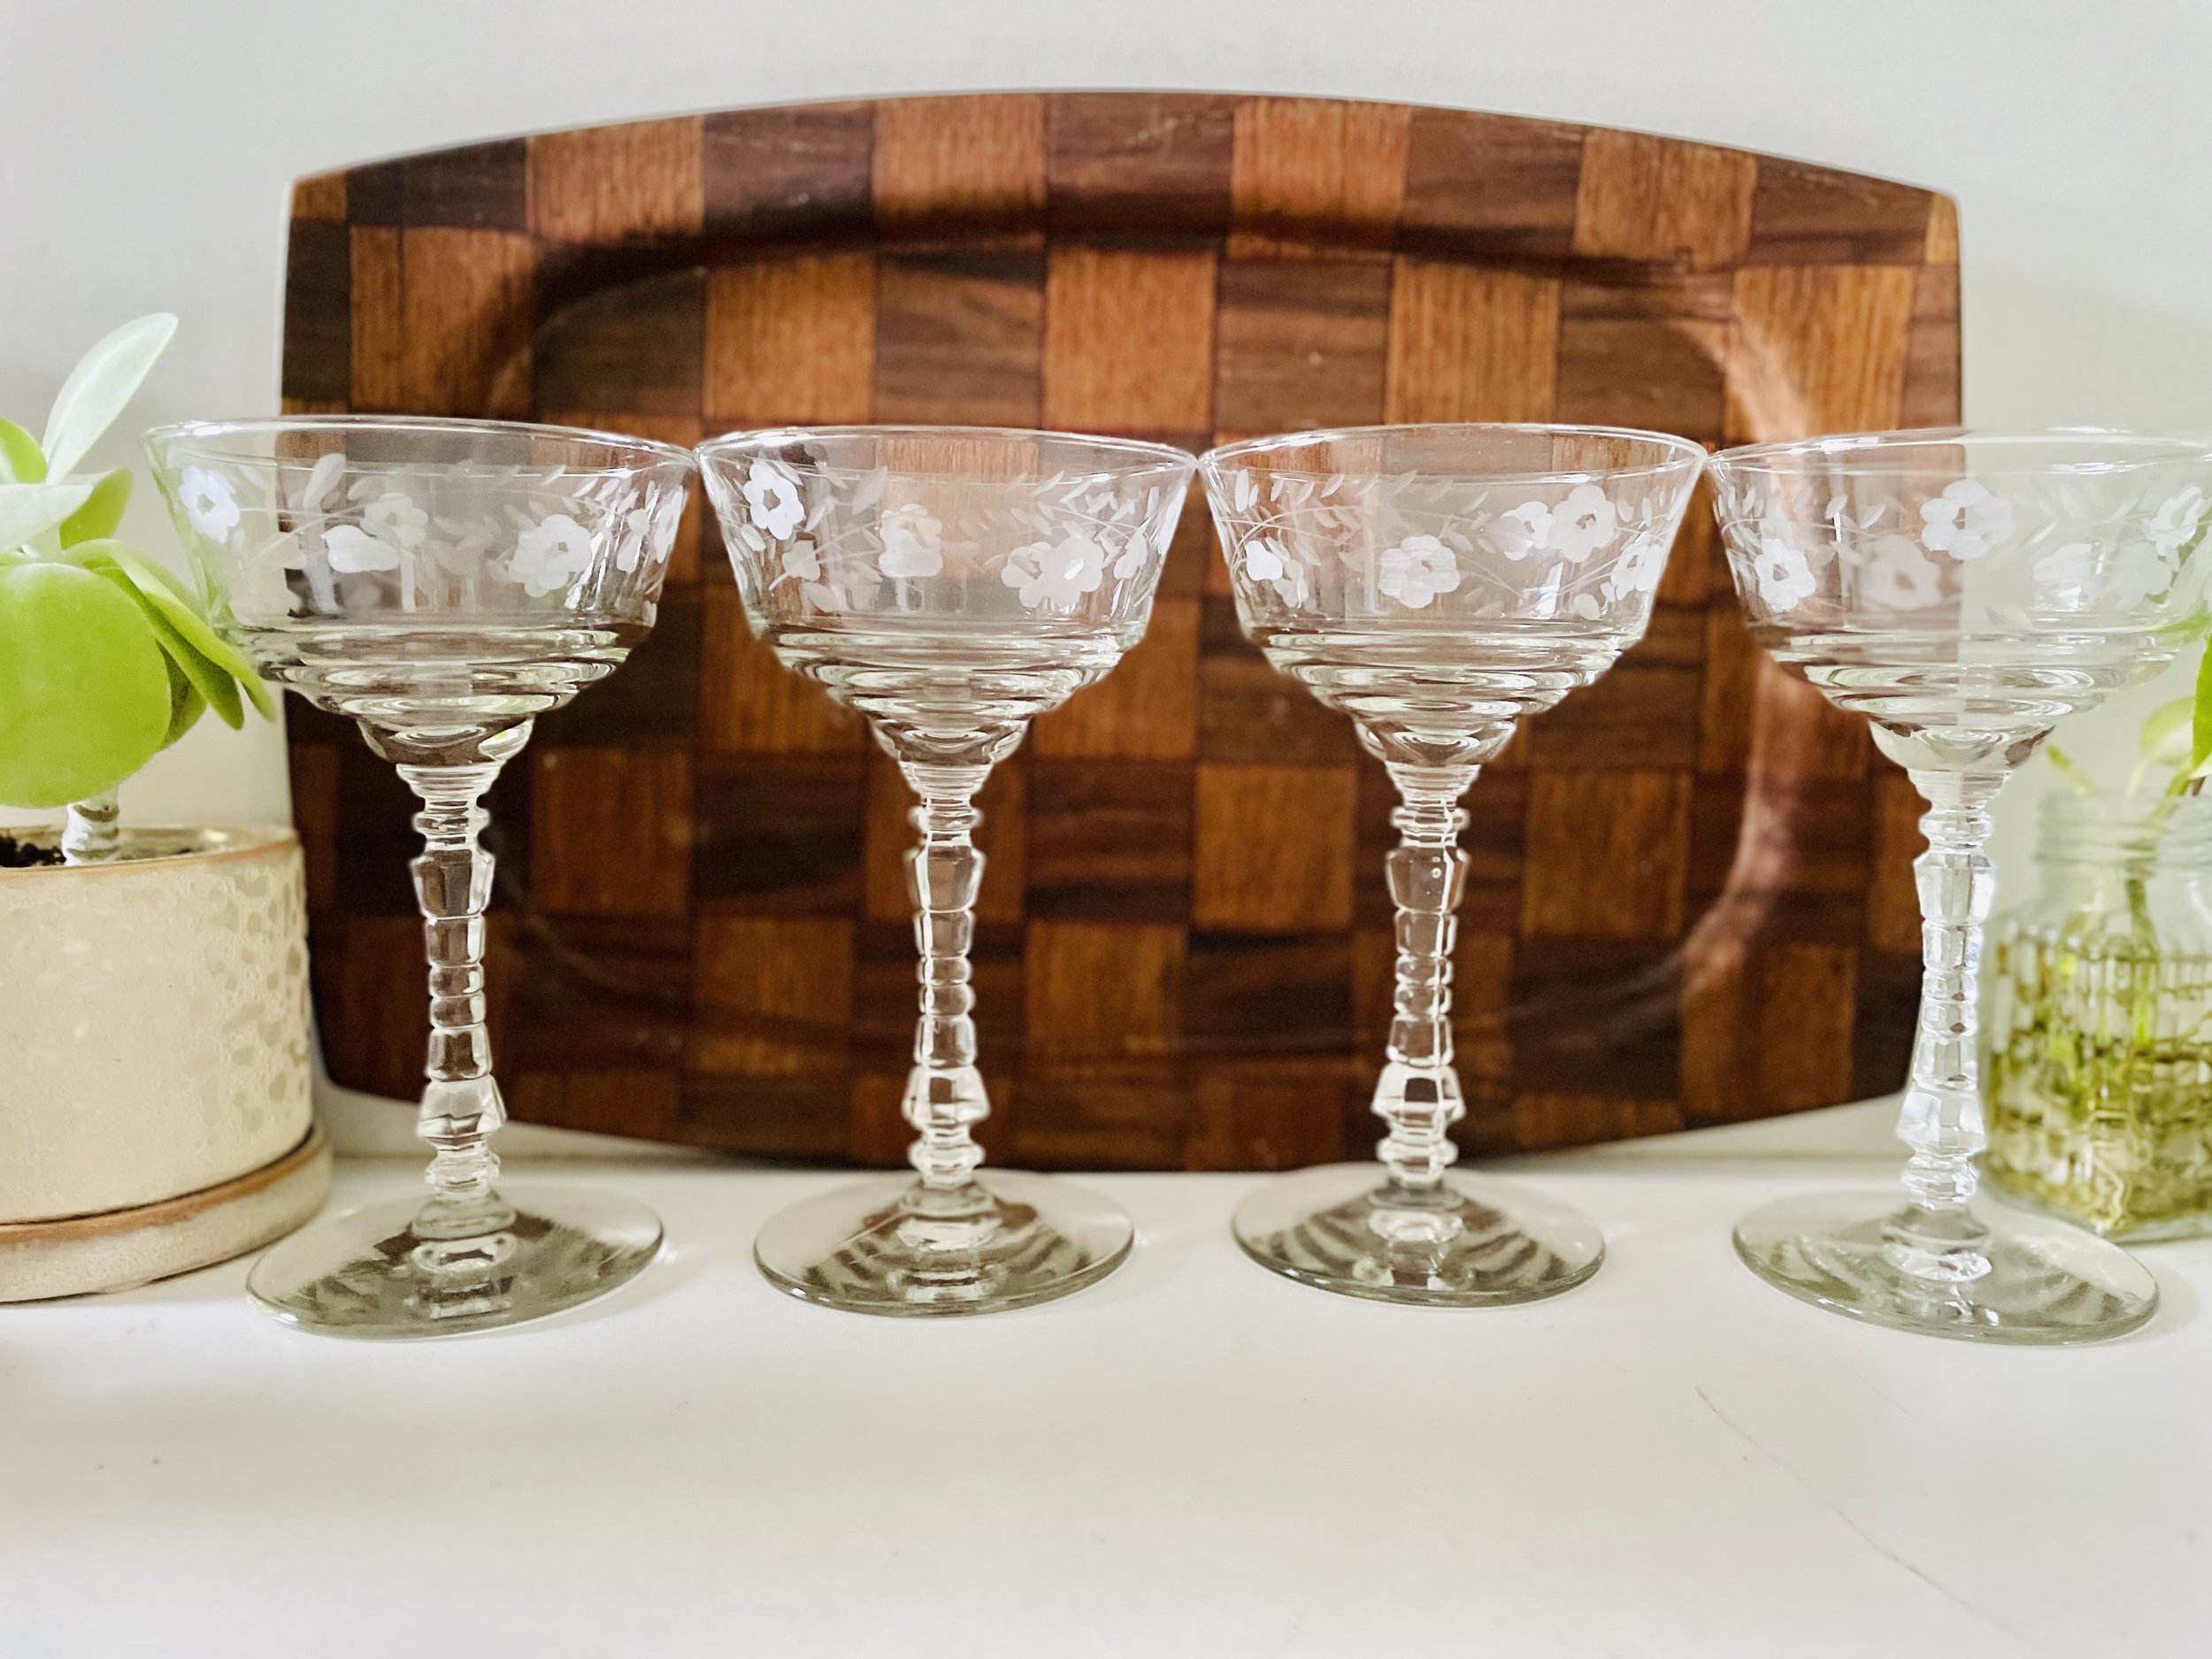 Set of 4, Vintage Etched Crystal Champagne Coupes by Rock Sharpe